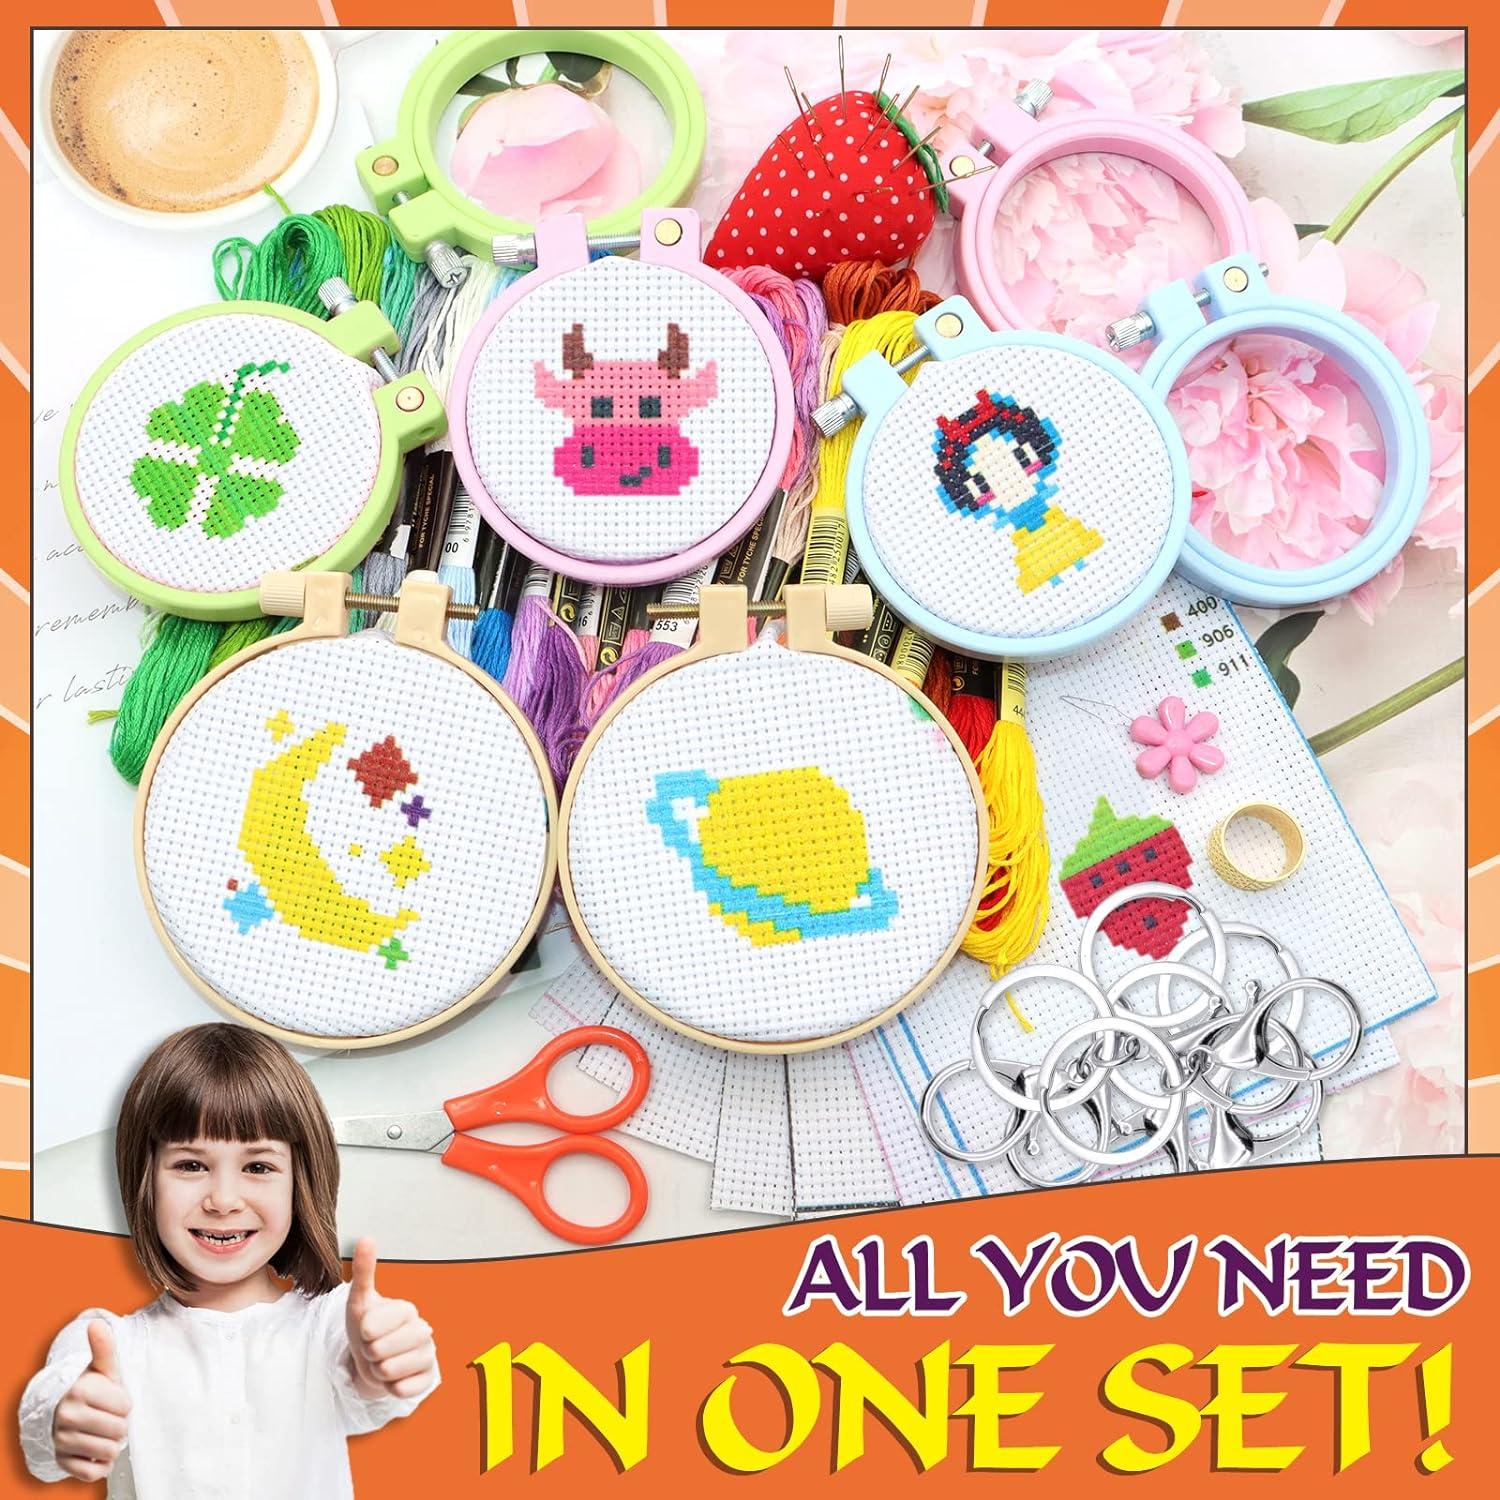 ZOCONE 12 PCS Cross Stitch Kits for Kids 7-13 Cross Stitch Beginner Kits  with Instructions Keychains Embroidery Hoops and Tools Needlepointing Kits  for Backpack Charms Cross Stitch Ornaments Kit 12 PCS Pattern2